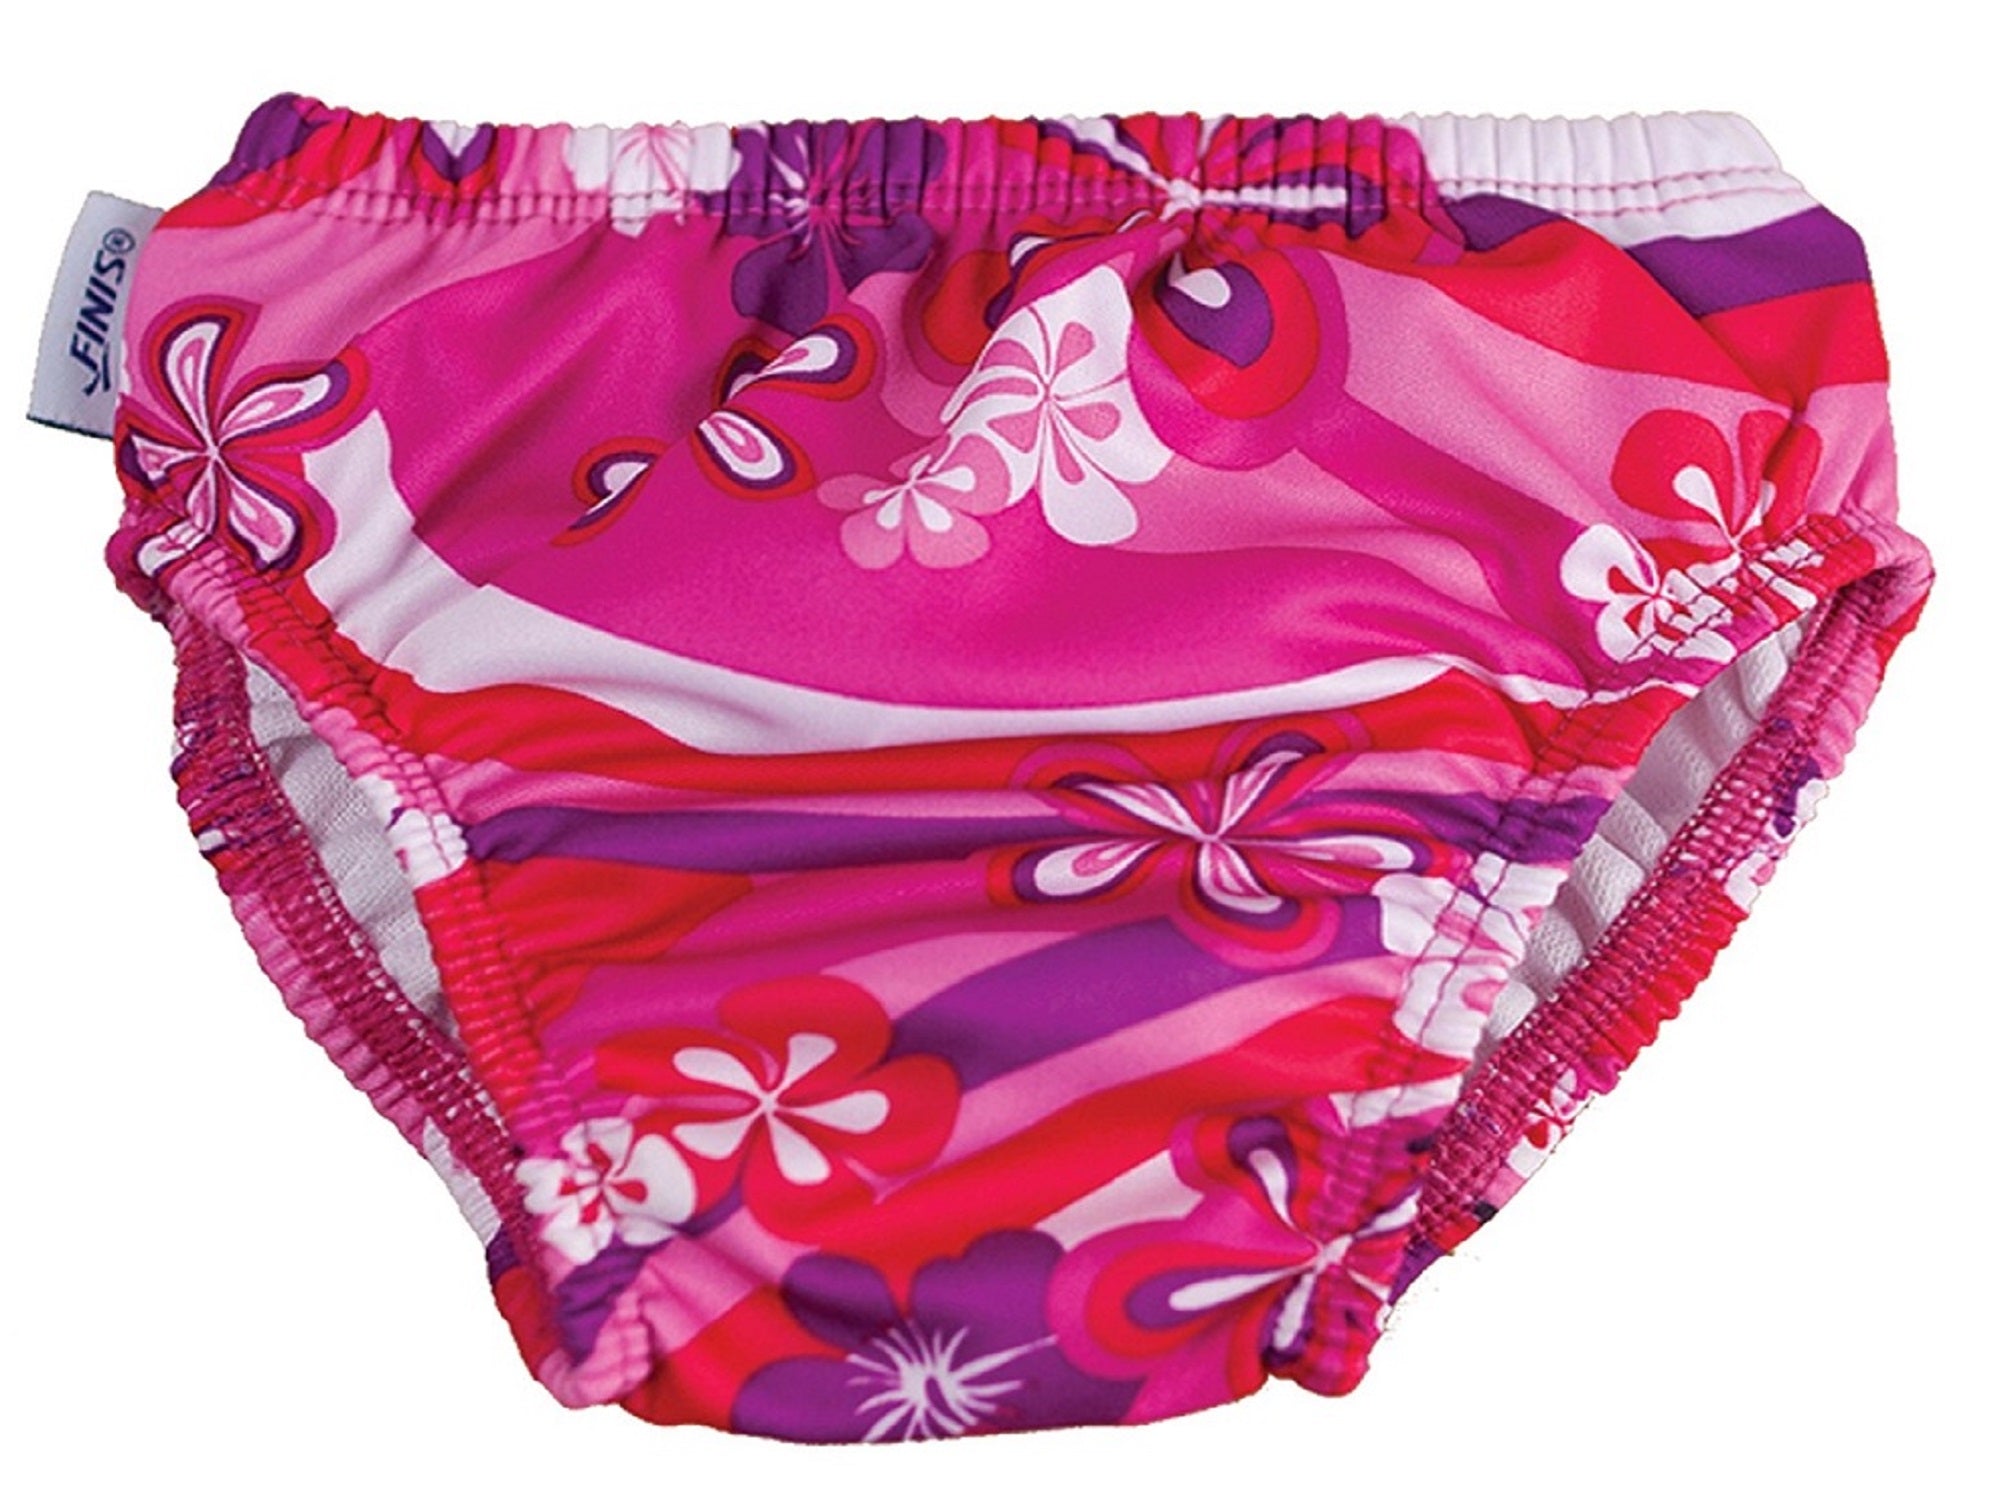 FINIS Flower Power Pink Reusable Swim Diaper, 4T (48 Months / 4 Years)